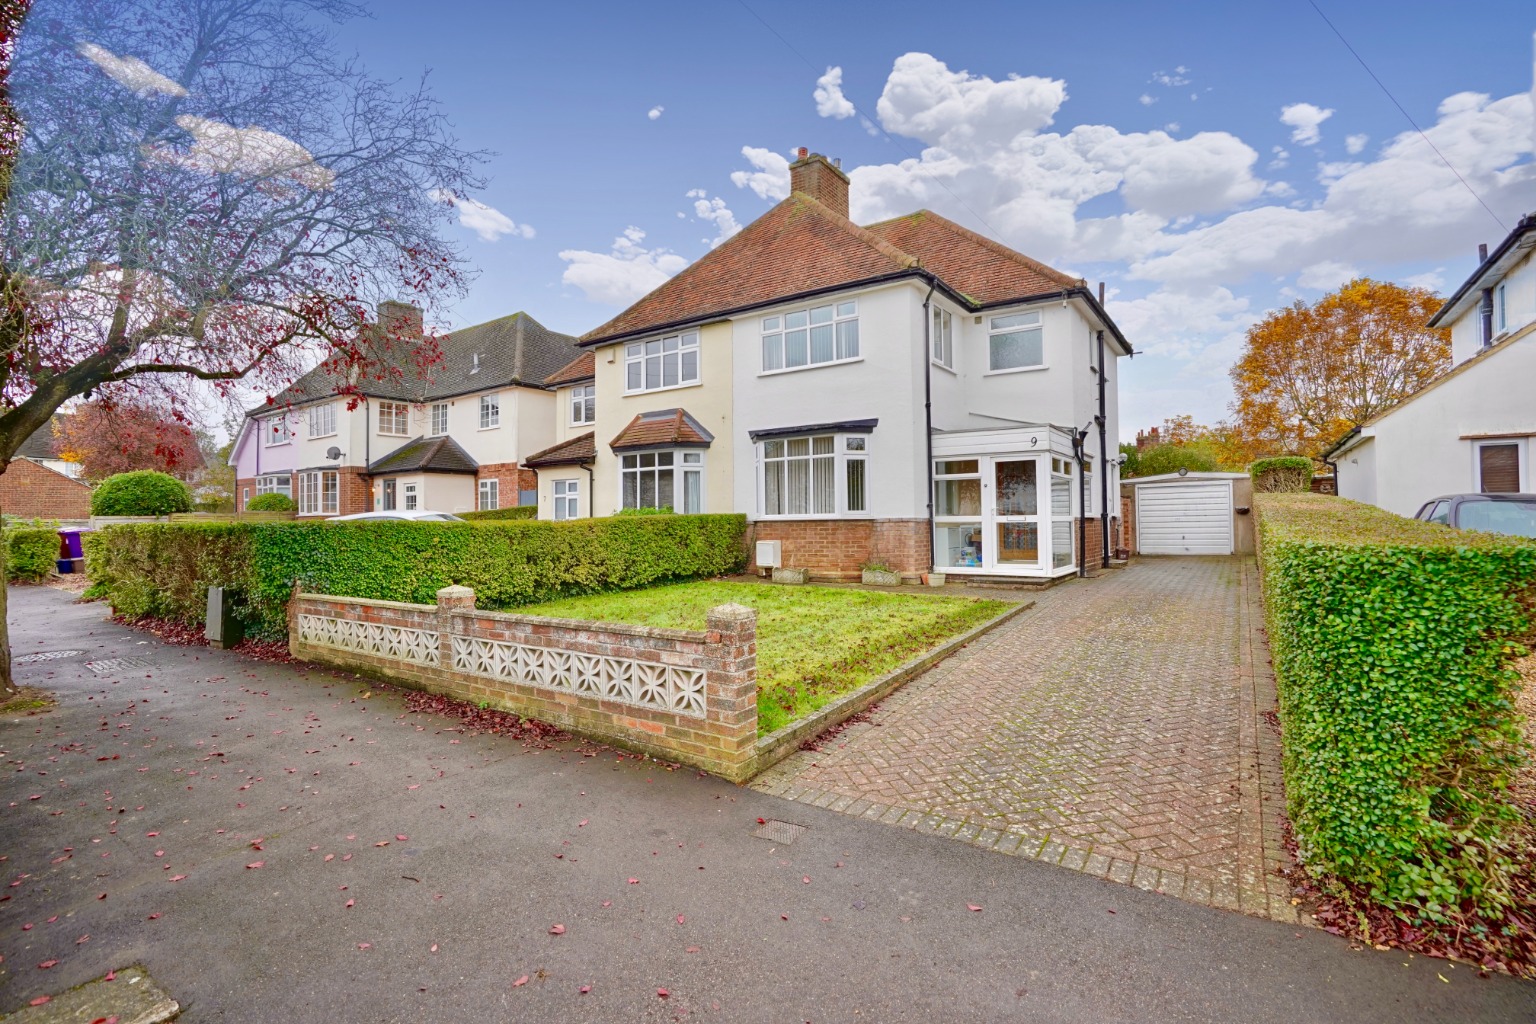 An established 1930s Semi-detached family home, situated on a leafy tree-lined road with convenient access to numerous amenities including shops, schooling, parks, and road and rail links.